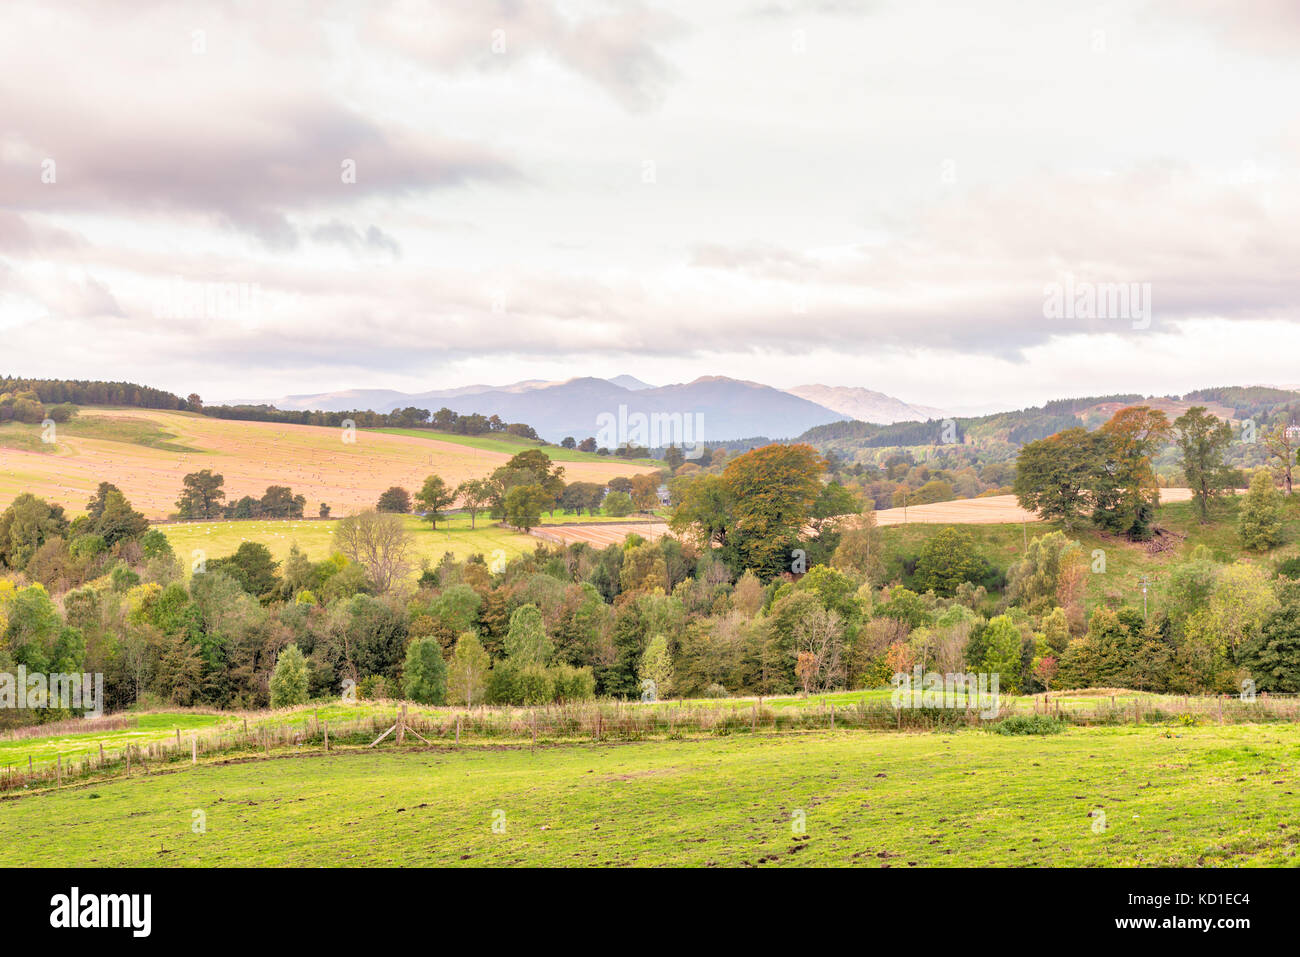 Fields Forrest & Hillside over Crieff in Scotland, with the misty mountains of Ben Chonzie in the distance during autumn. Stock Photo